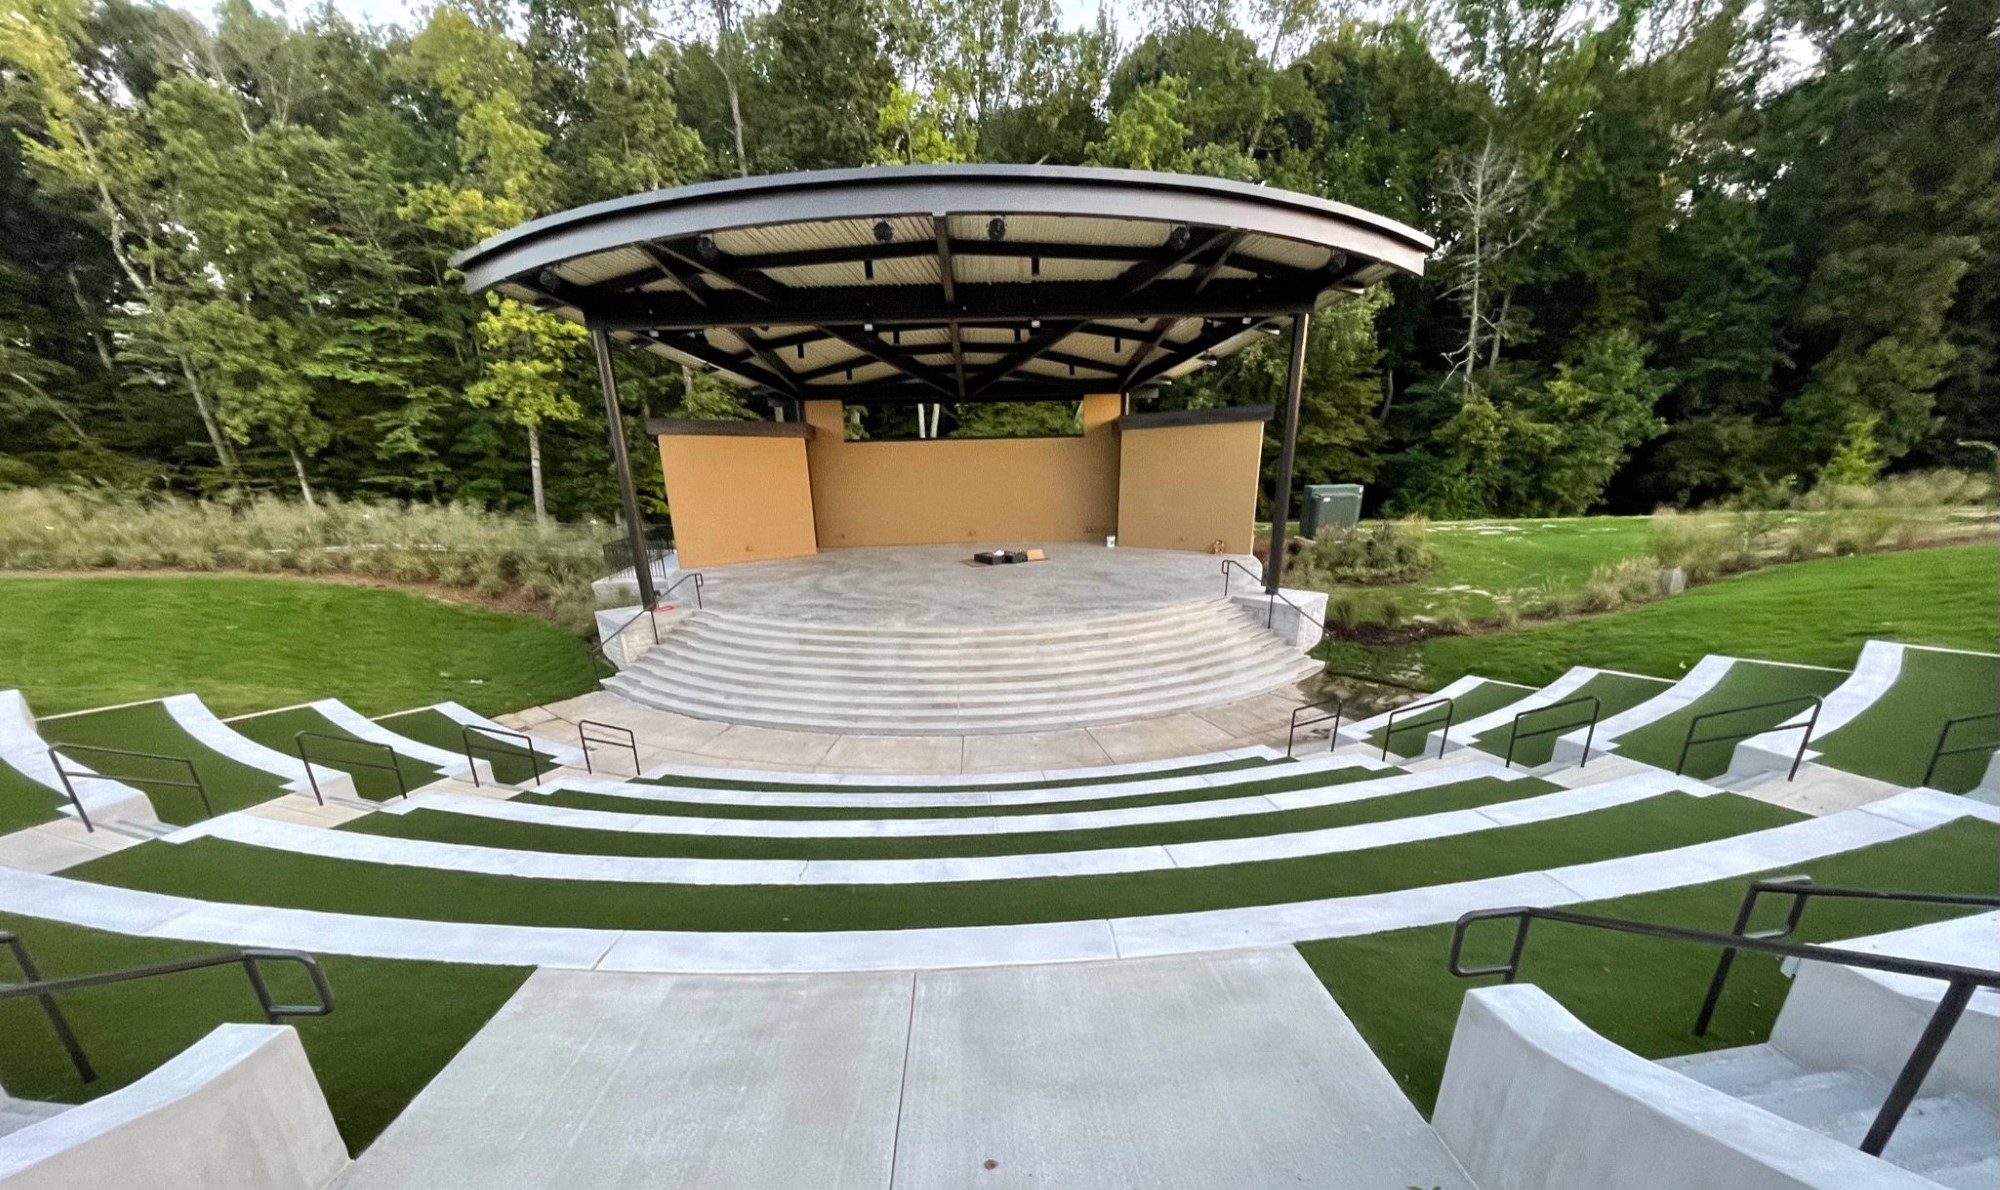 Artificial grass amphitheater installed by SYNLawn